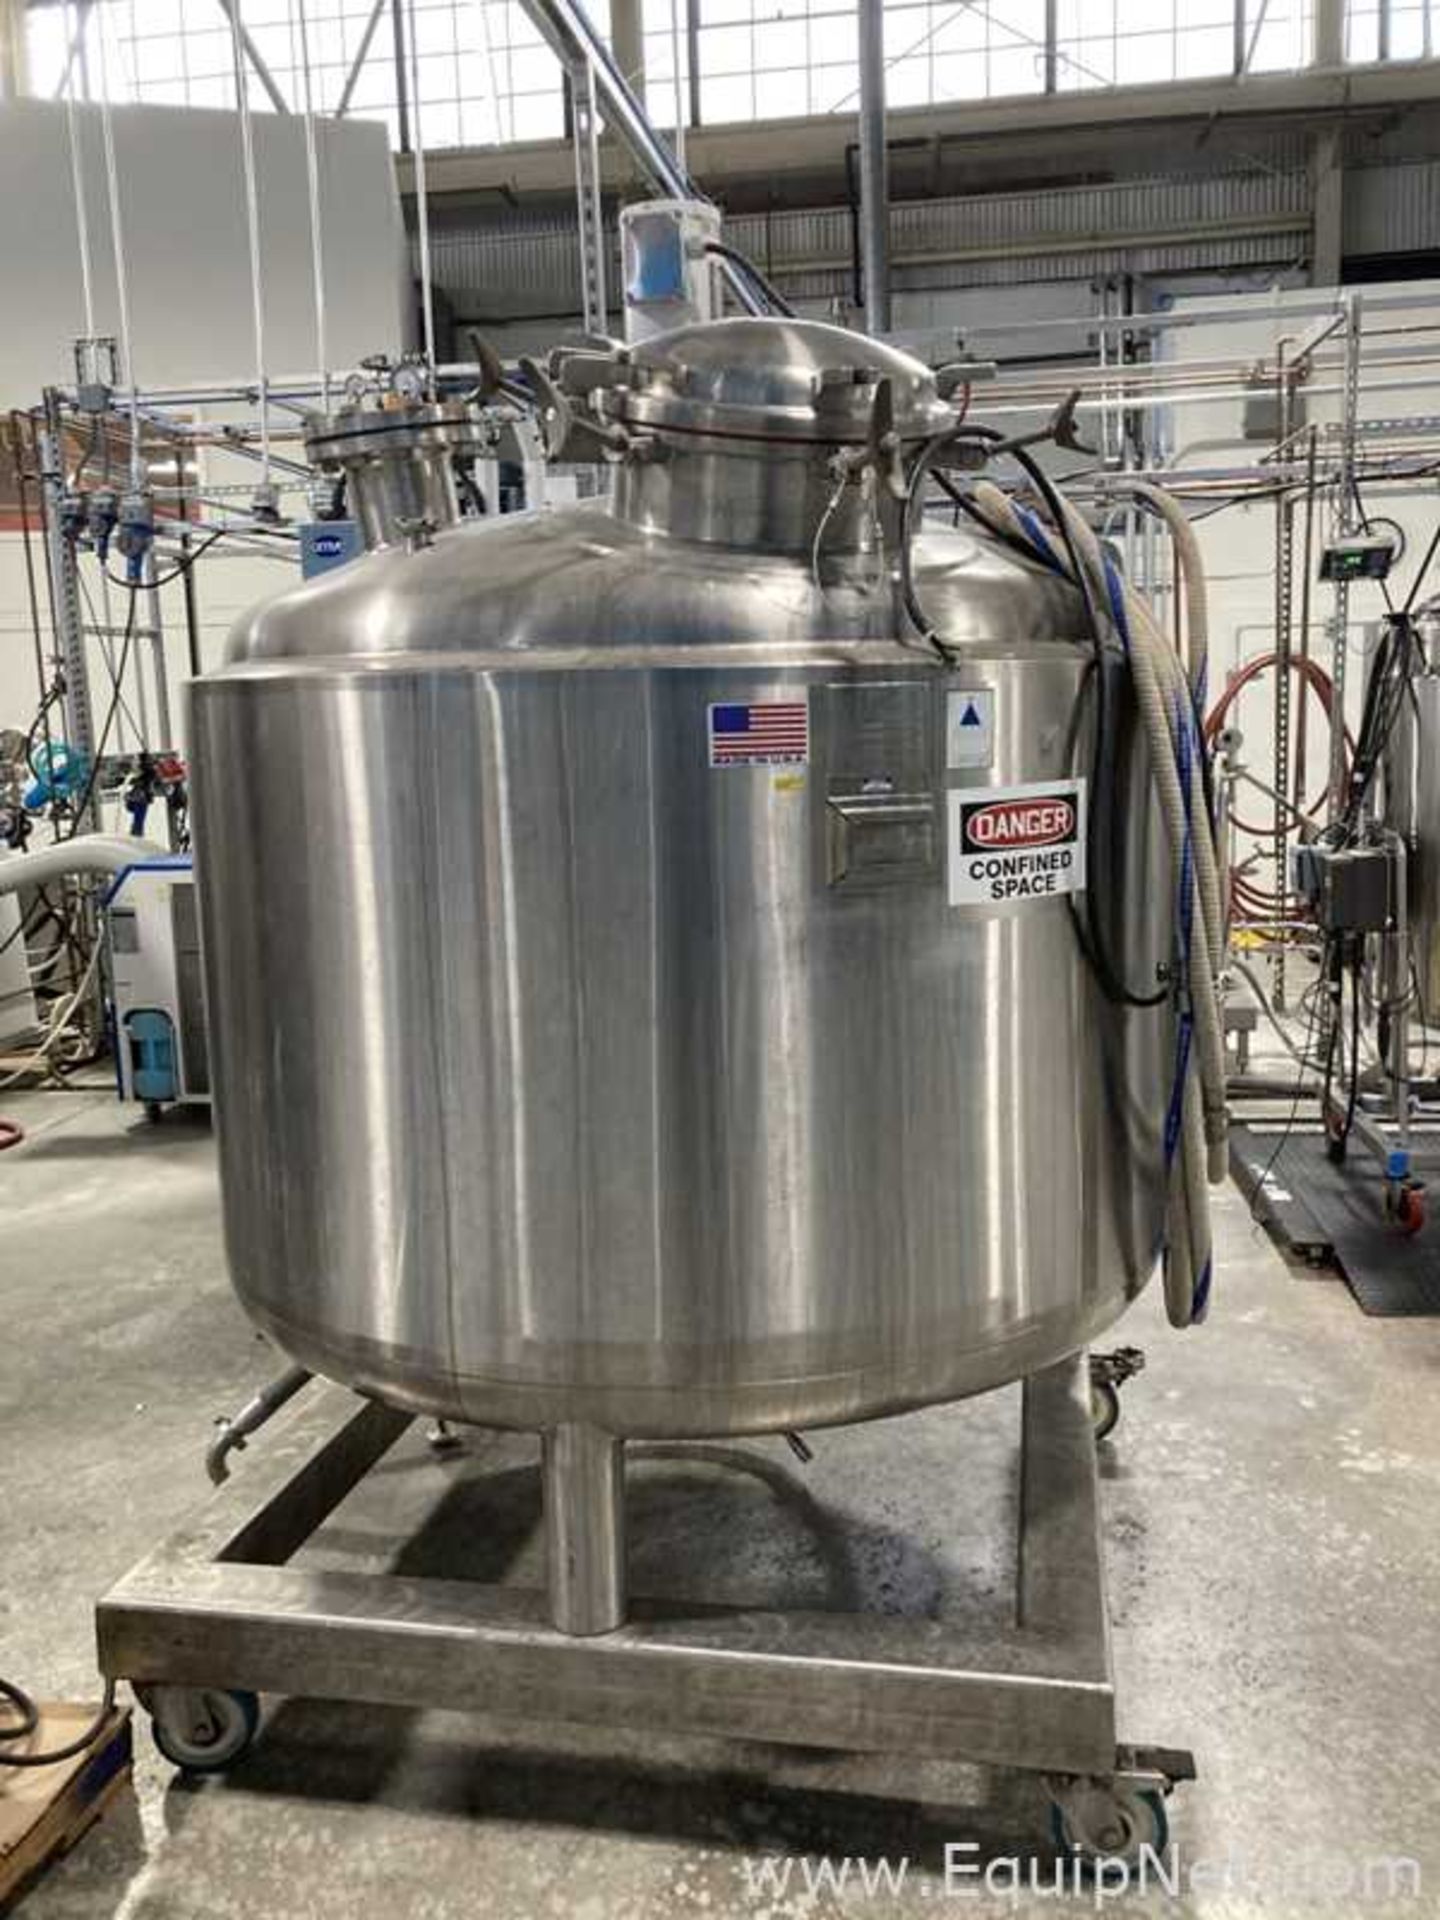 Precision Stainless 1500 Liter Stainless Steel Tank - Image 2 of 14